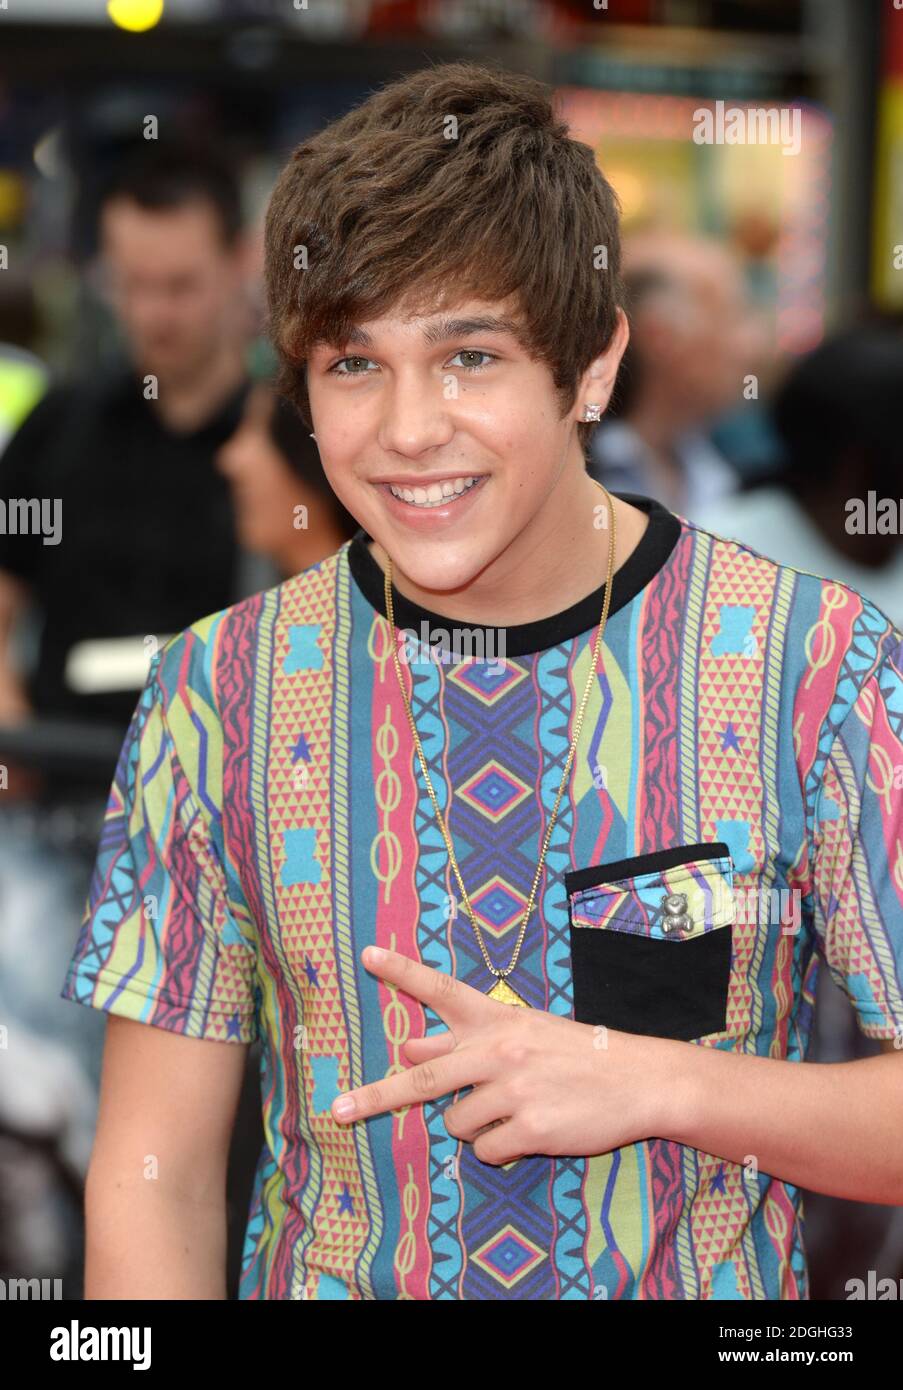 Austine Mahone arriving at the UK Premiere of The Wolverine, Empire Cinema, Leicester Square, London. Stock Photo